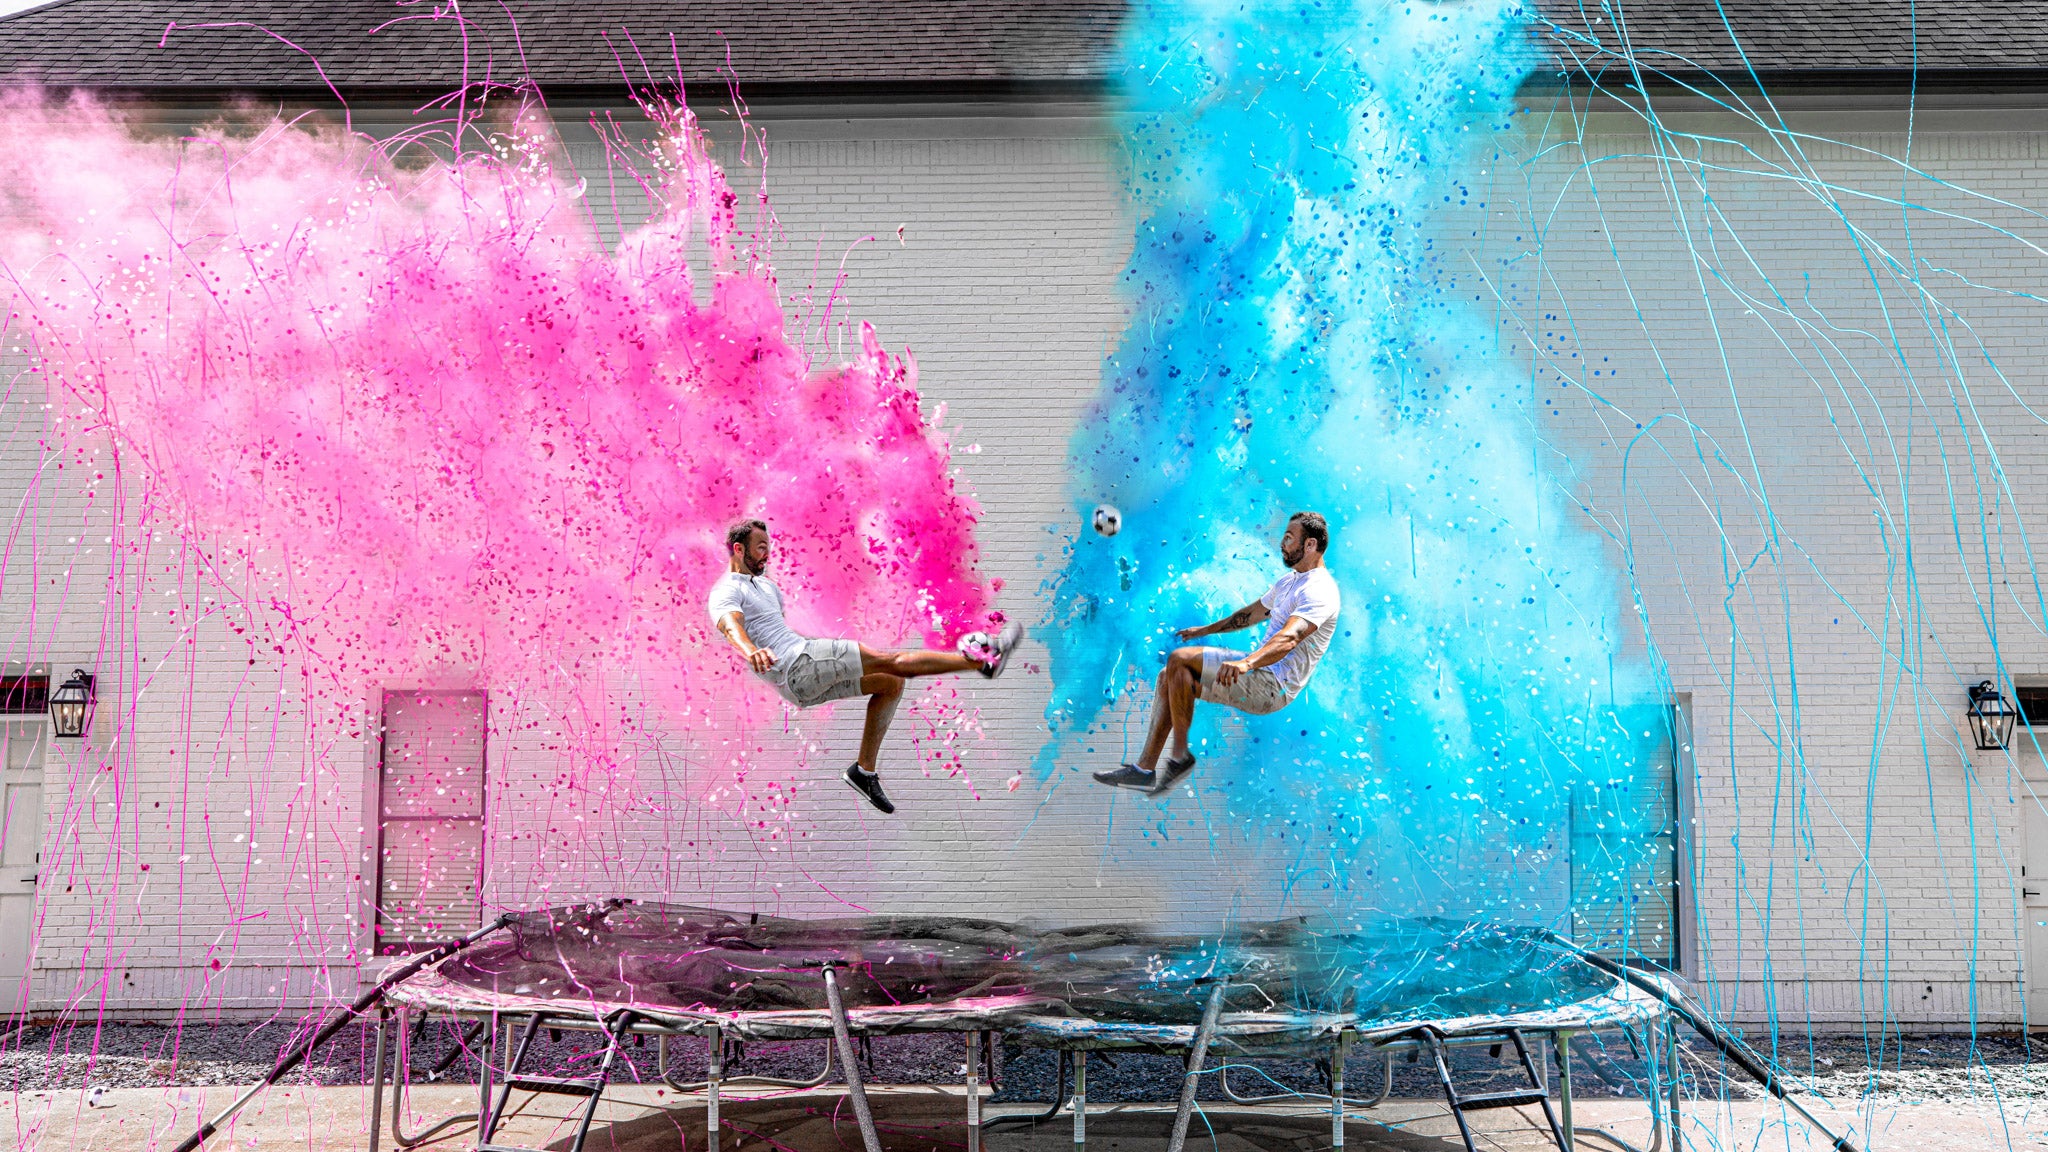 Burnout Gender Reveal  Poof There It Is – POOF THERE IT IS!